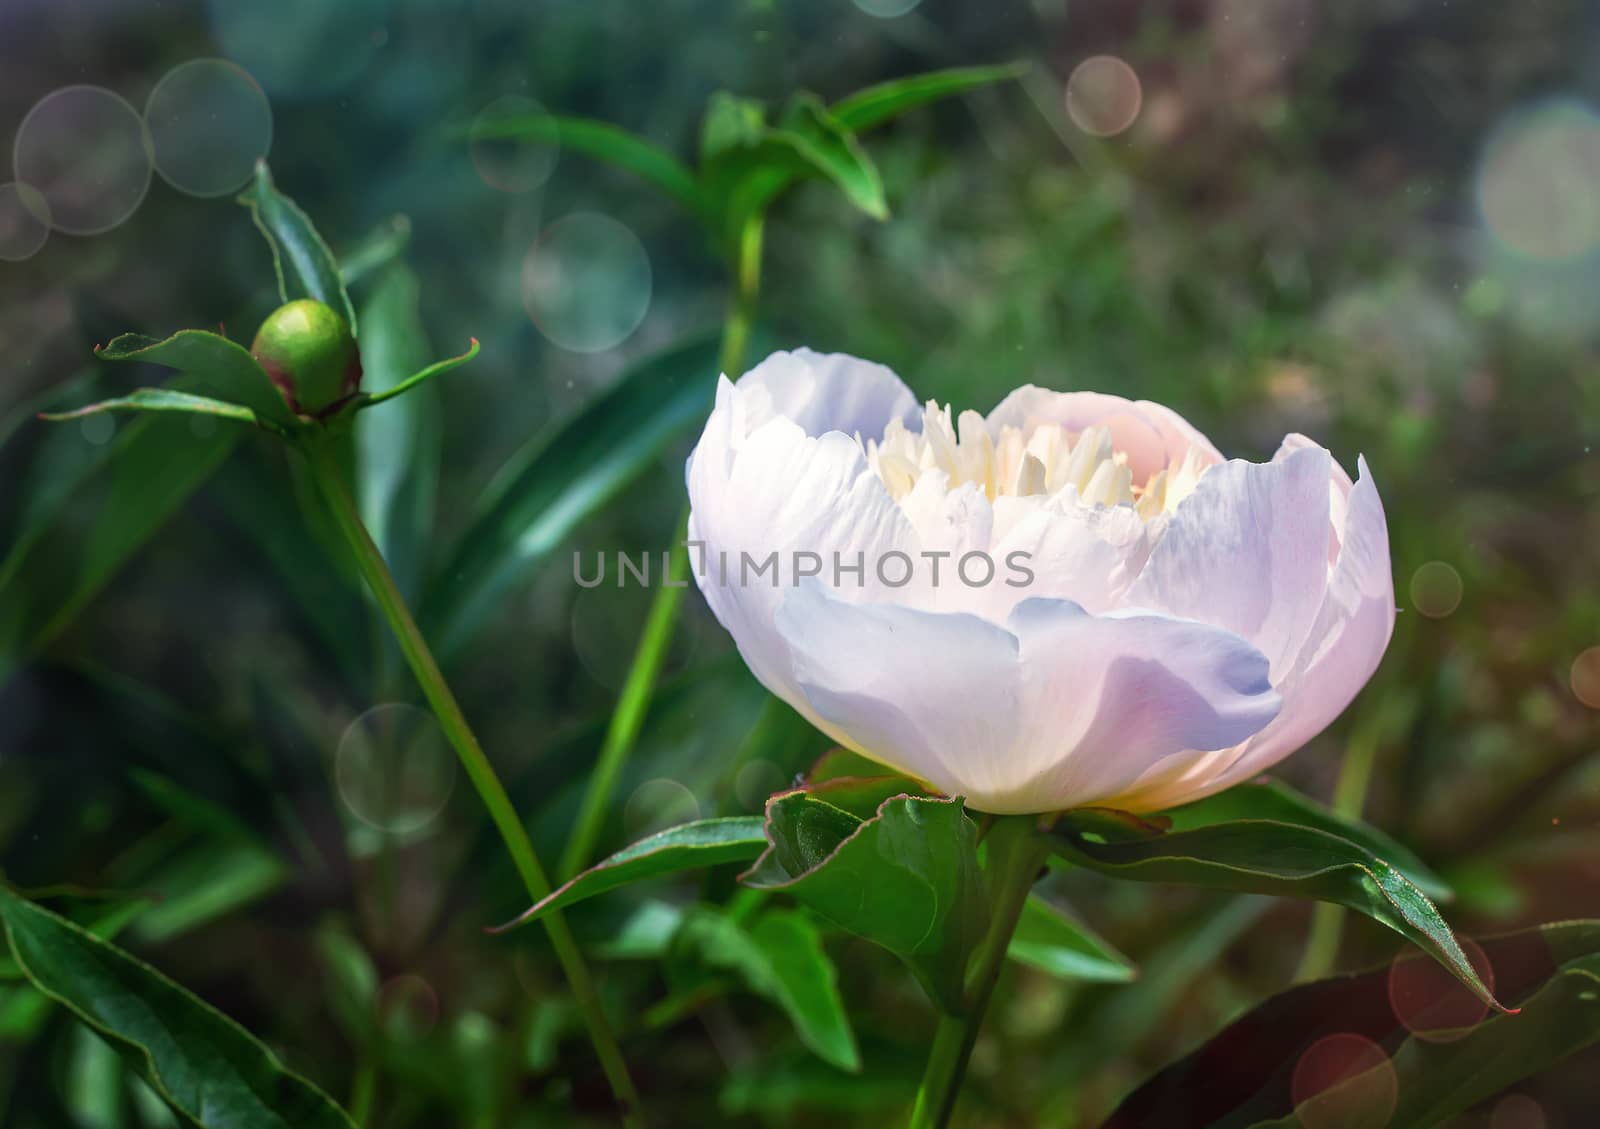 Blossoming white peony among green leaves by georgina198